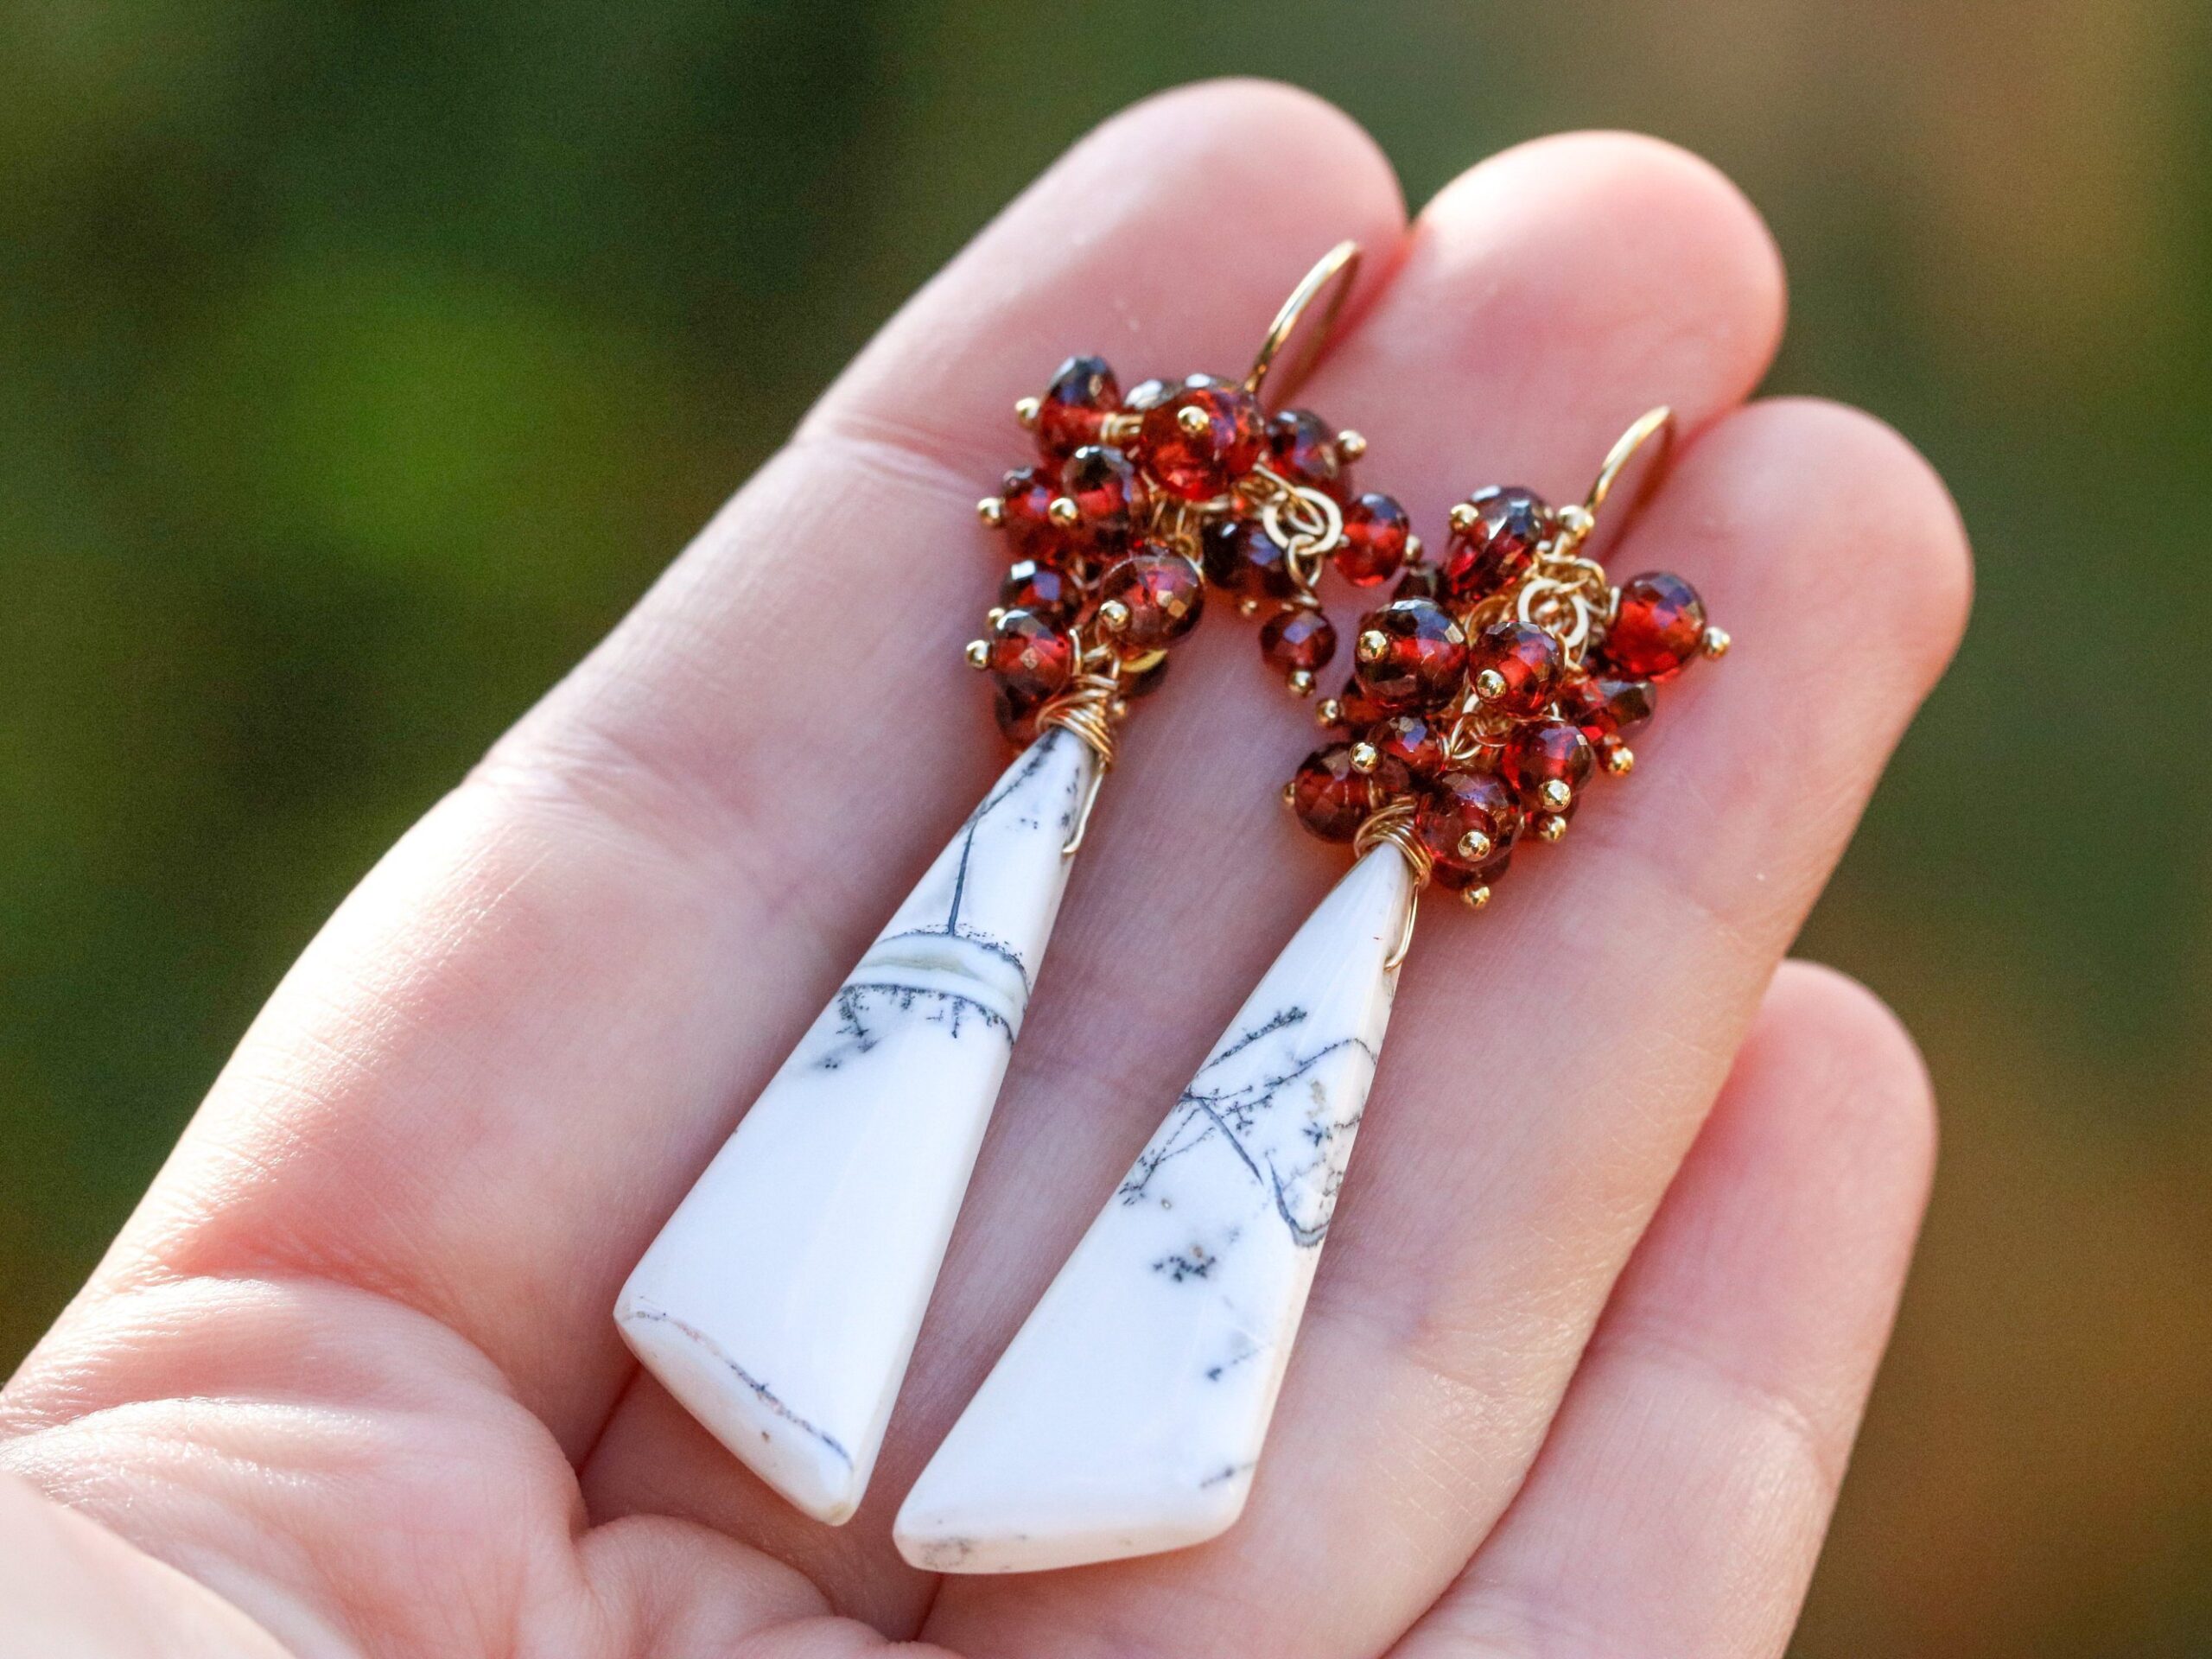 Red Garnet and Dendrite Opal Cluster Earrings in Gold, One of a Kind